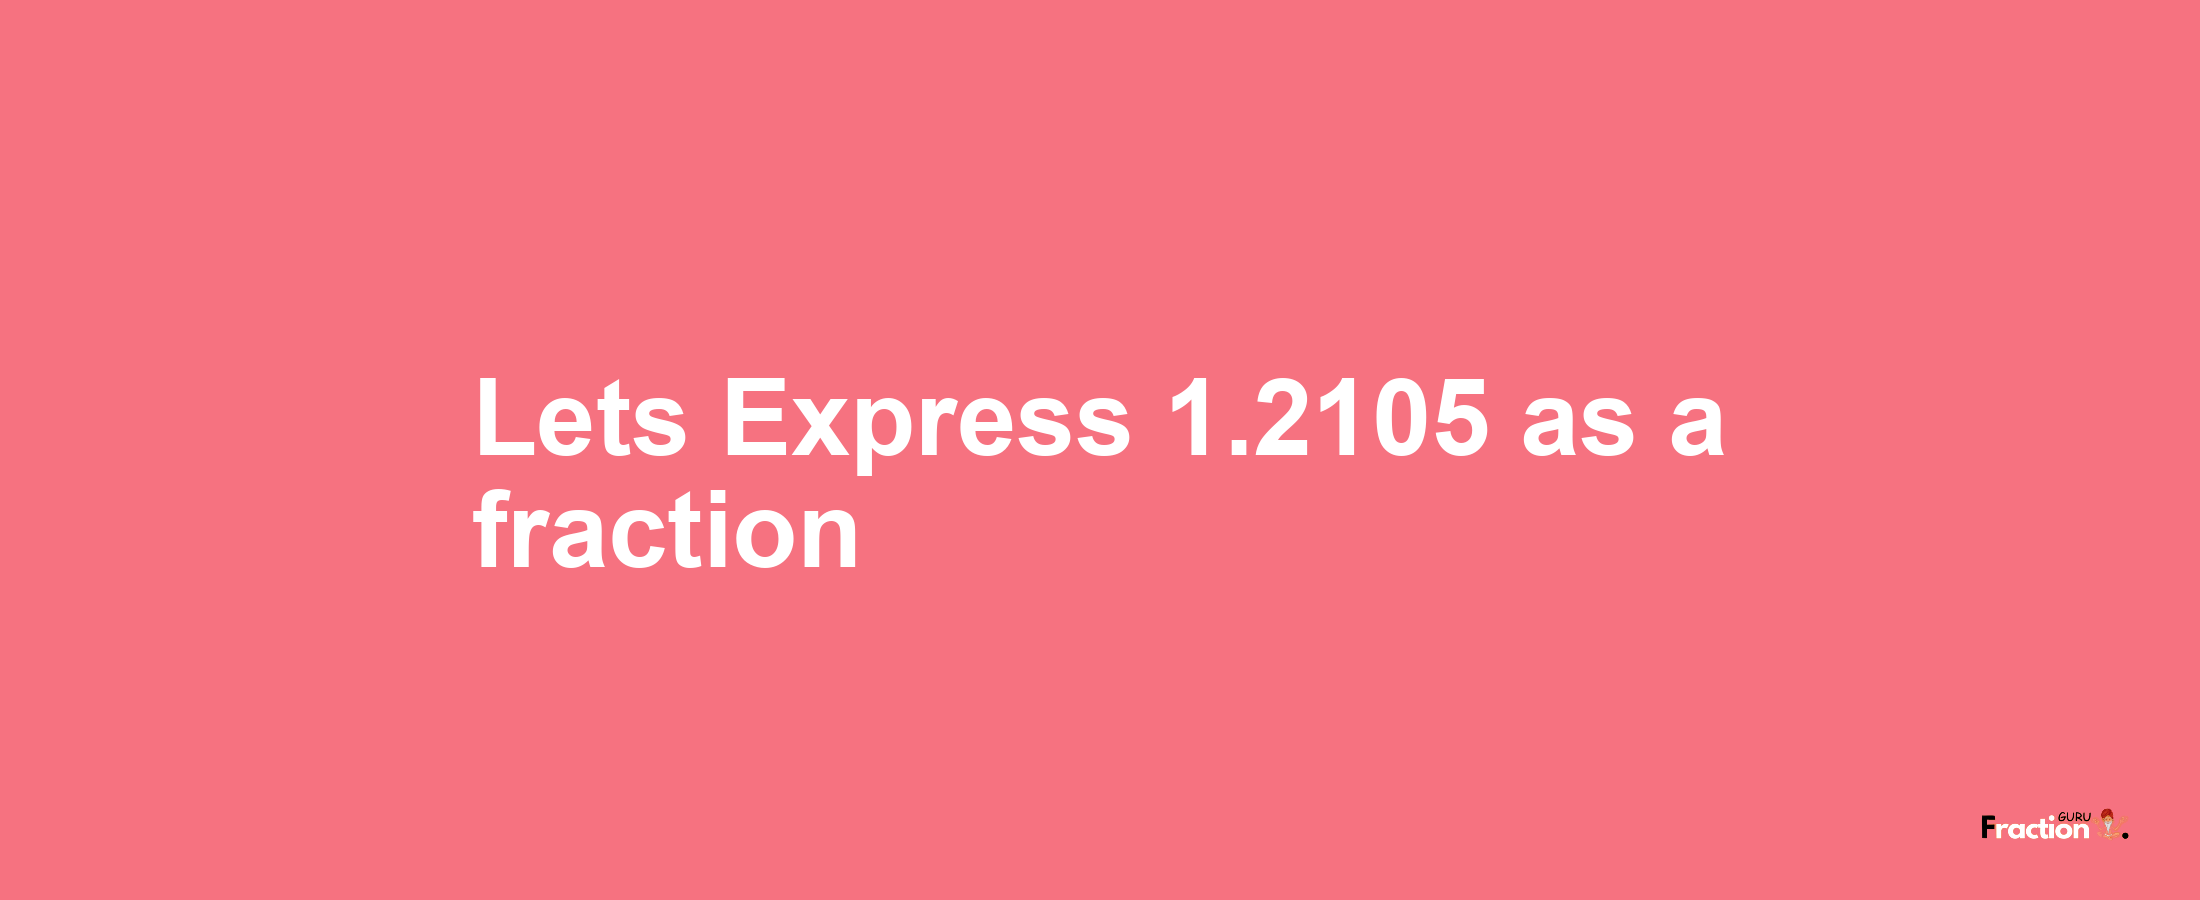 Lets Express 1.2105 as afraction